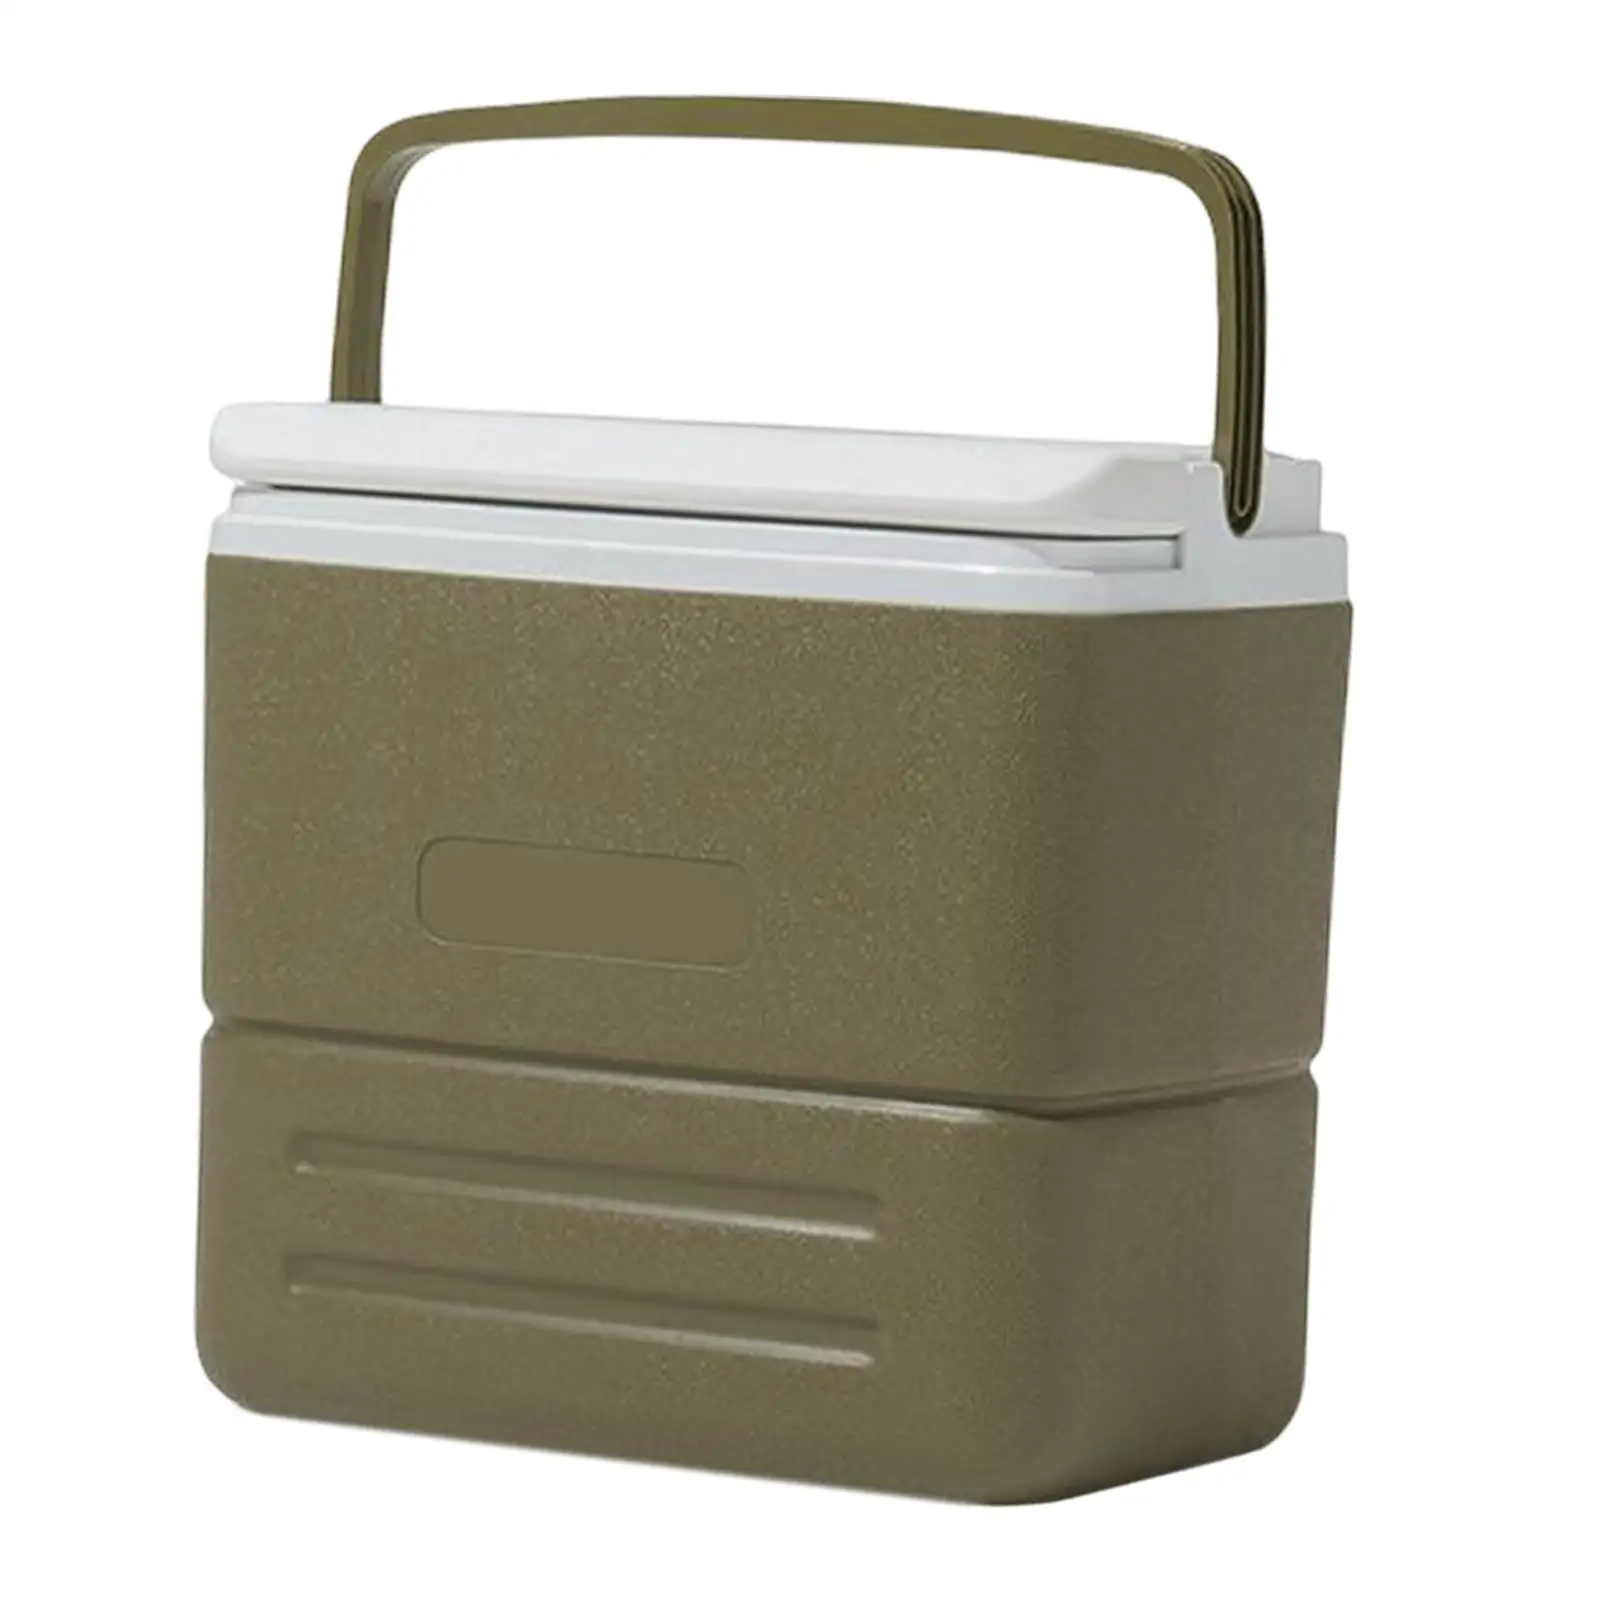 Cooler Bag Storage Freezer Food Delivery Catering Therma Fridge Insulated Thermal Lunch Box for BBQ Van Boat Kayaking